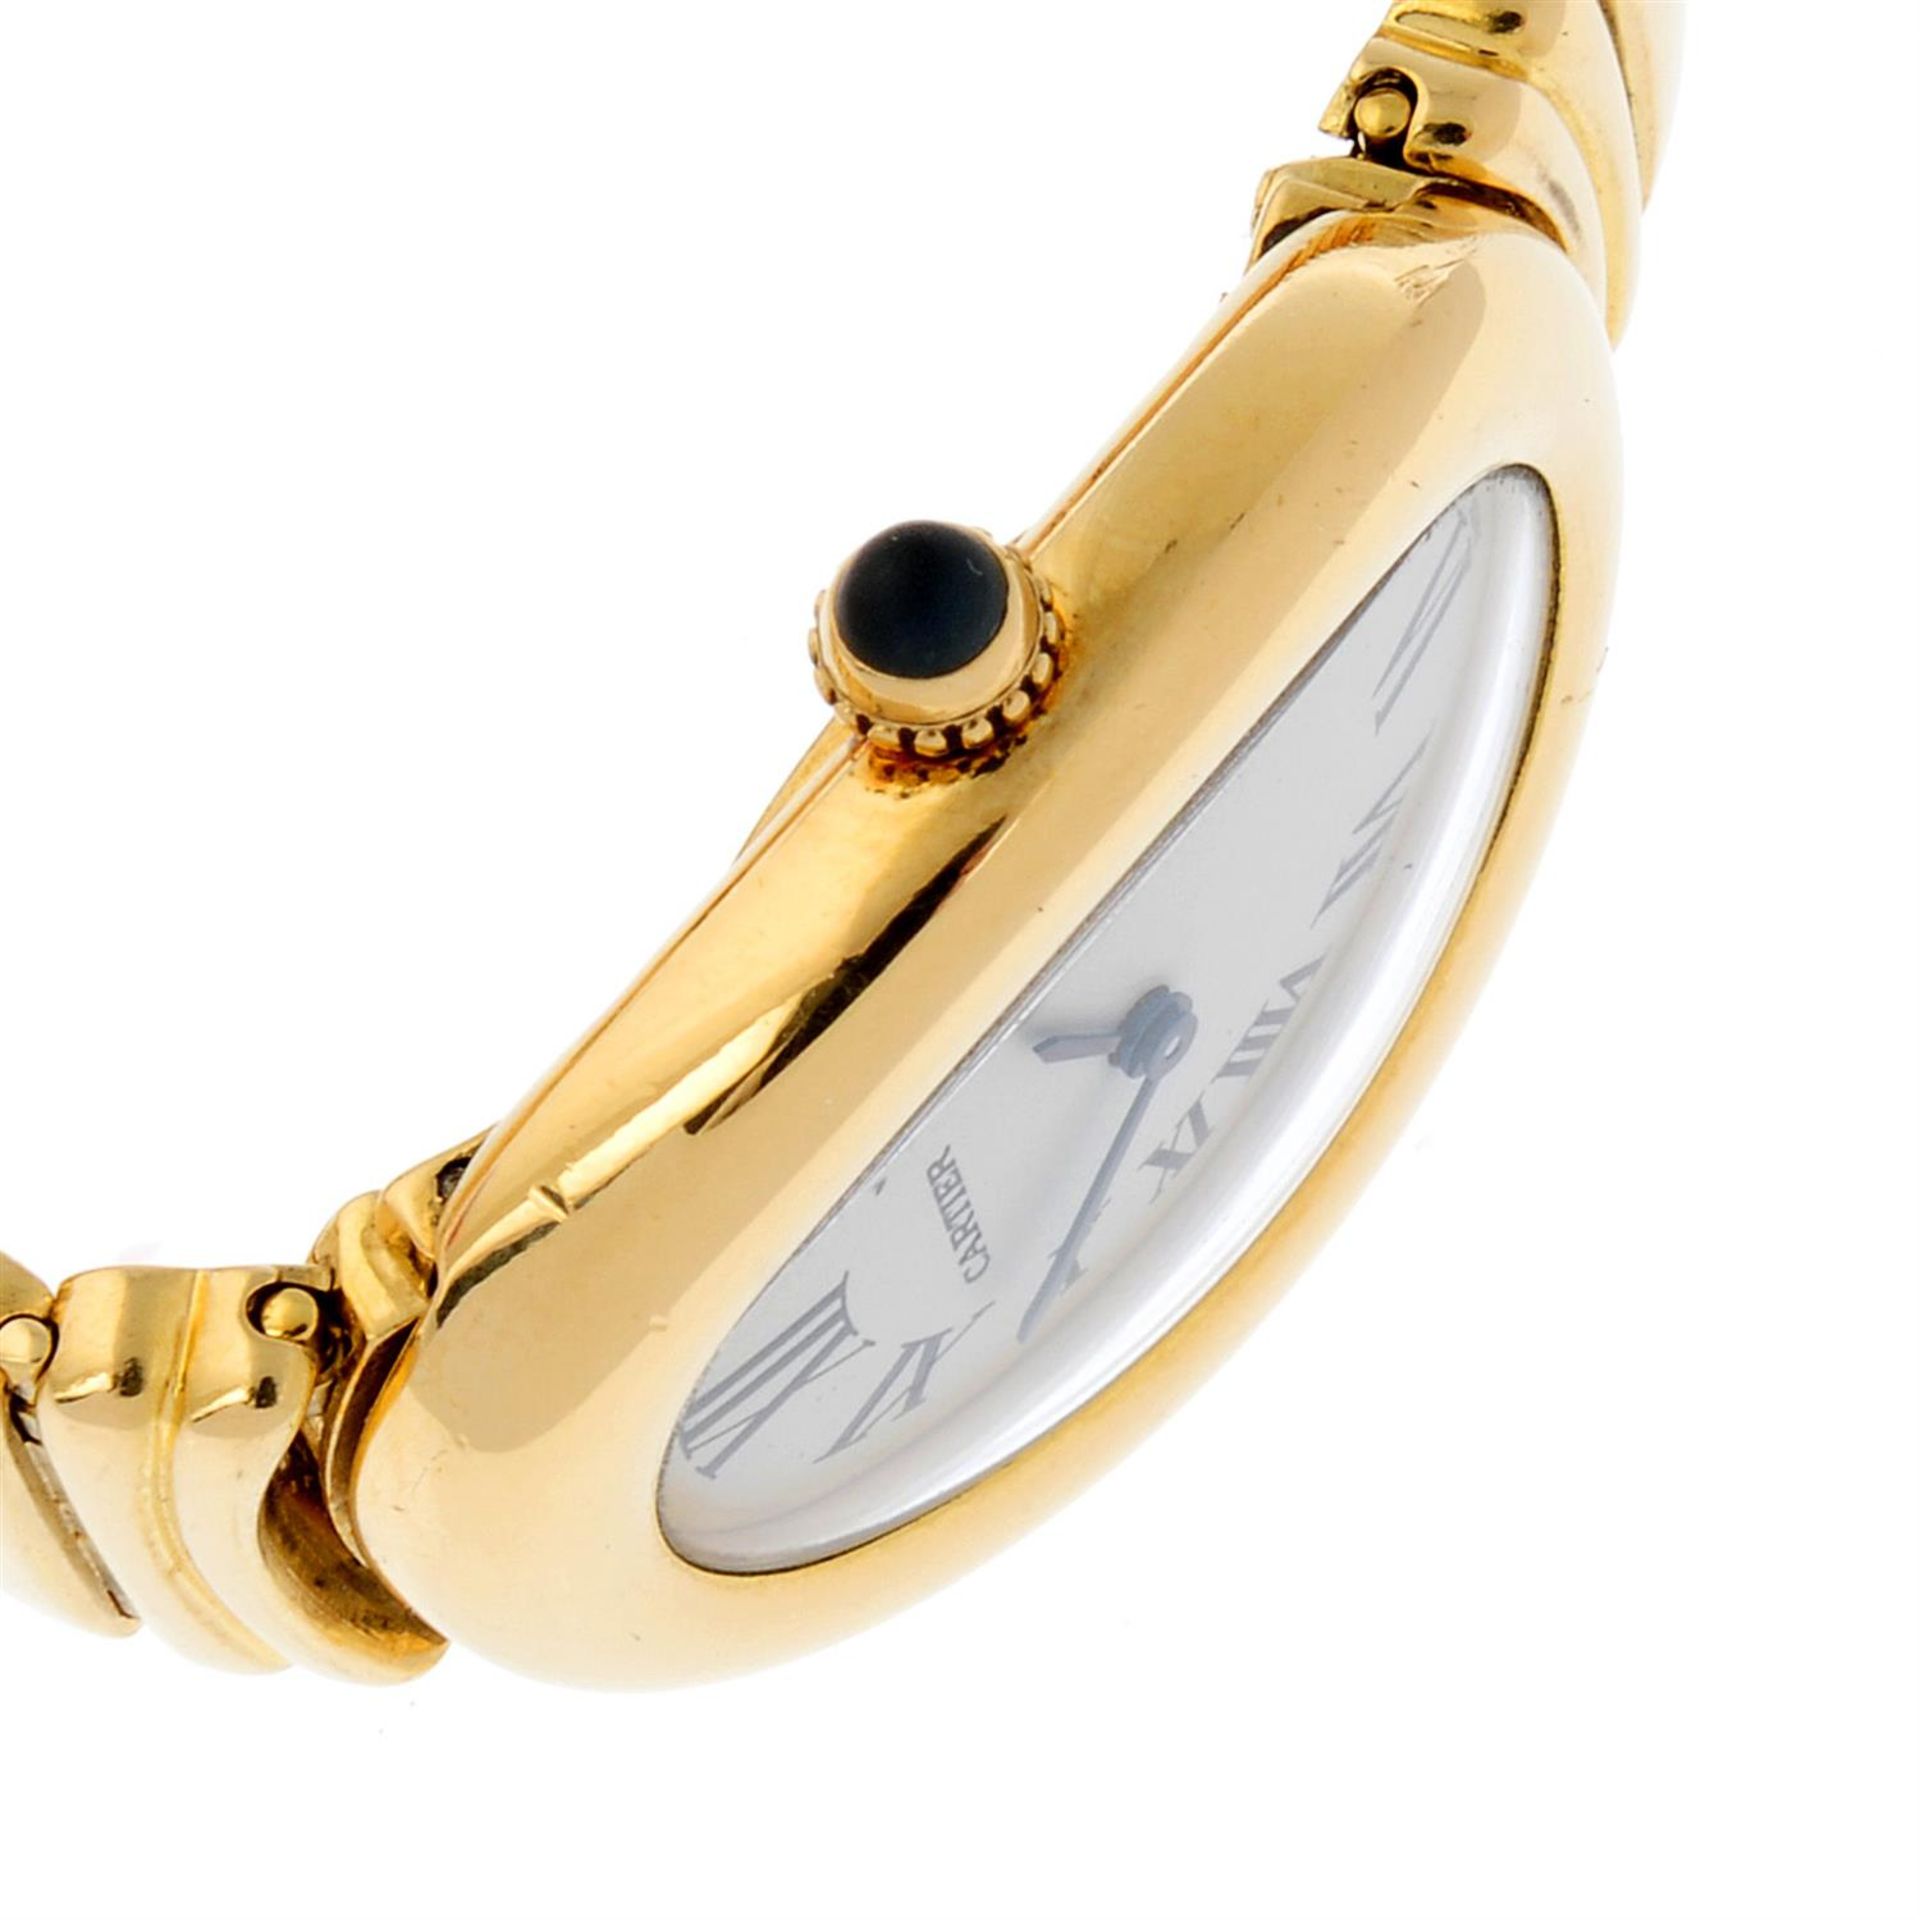 CARTIER - an 18ct yellow gold Baignoire bracelet watch, 22mmx30mm. - Image 3 of 6